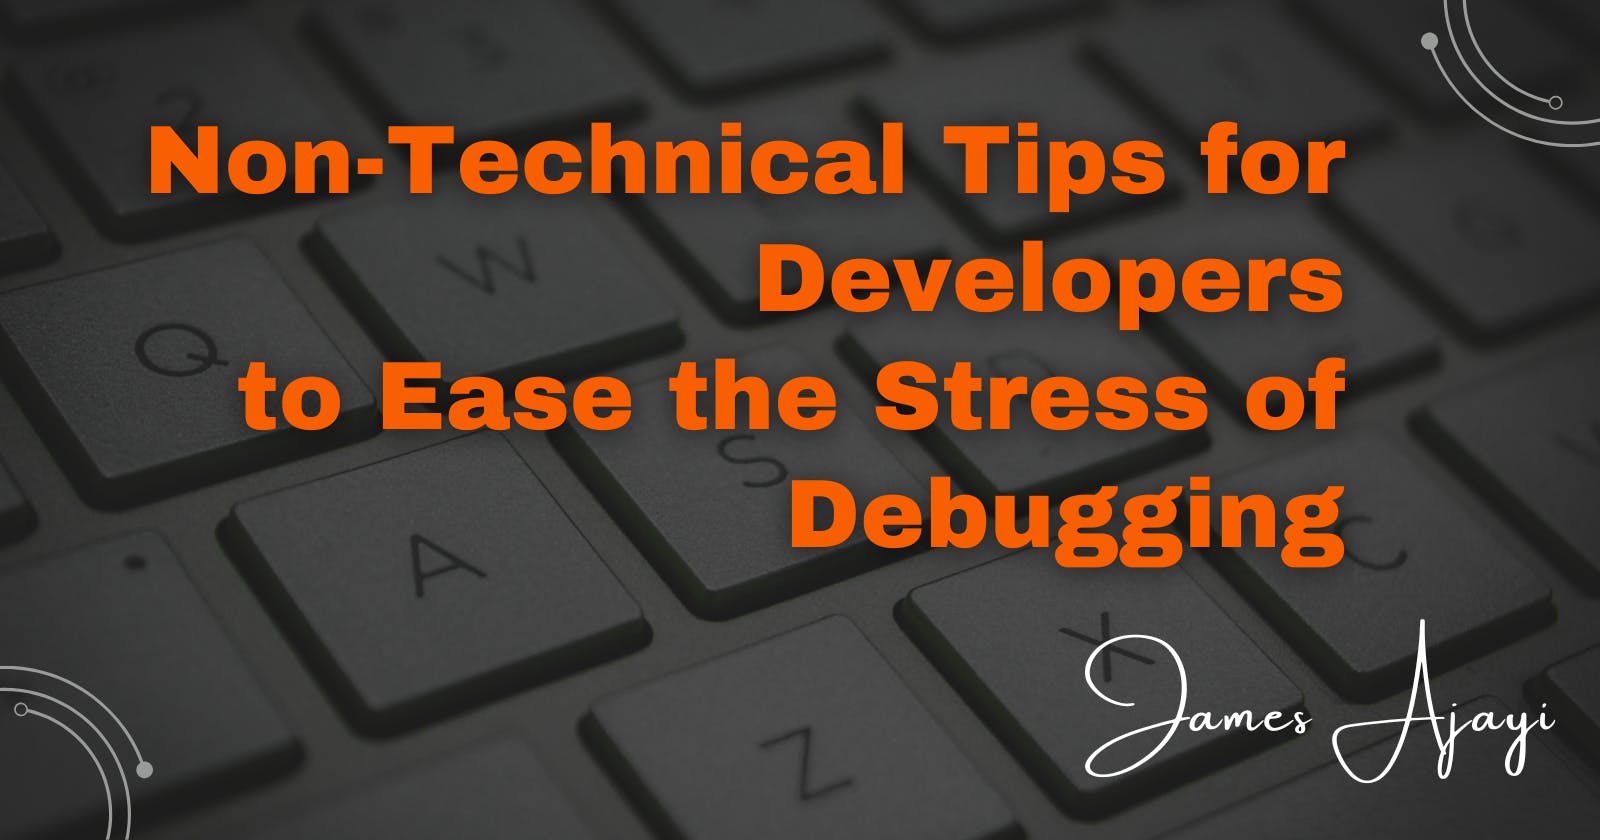 Non-Technical Tips for Developers to Ease the Stress of Debugging